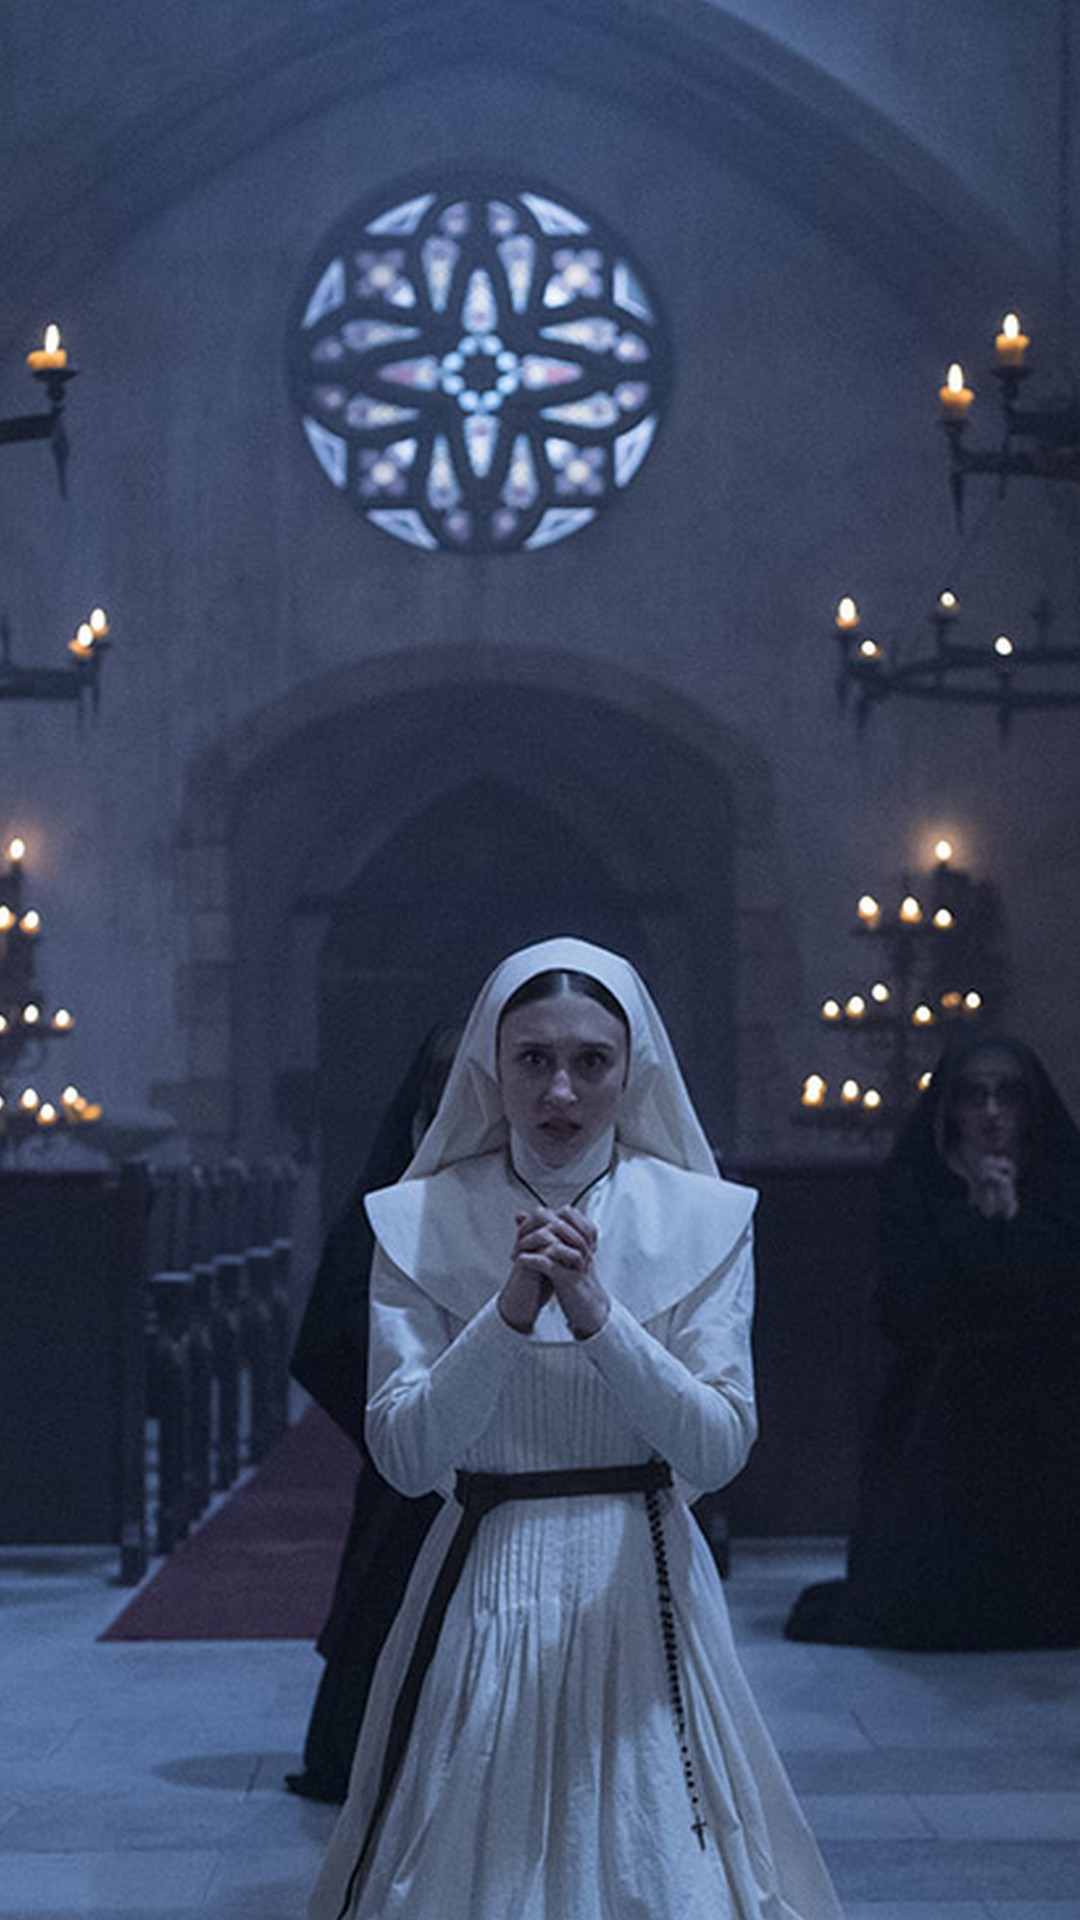 Wallpaper The Nun Poster Android with image resolution 1080x1920 pixel. You can make this wallpaper for your Android backgrounds, Tablet, Smartphones Screensavers and Mobile Phone Lock Screen